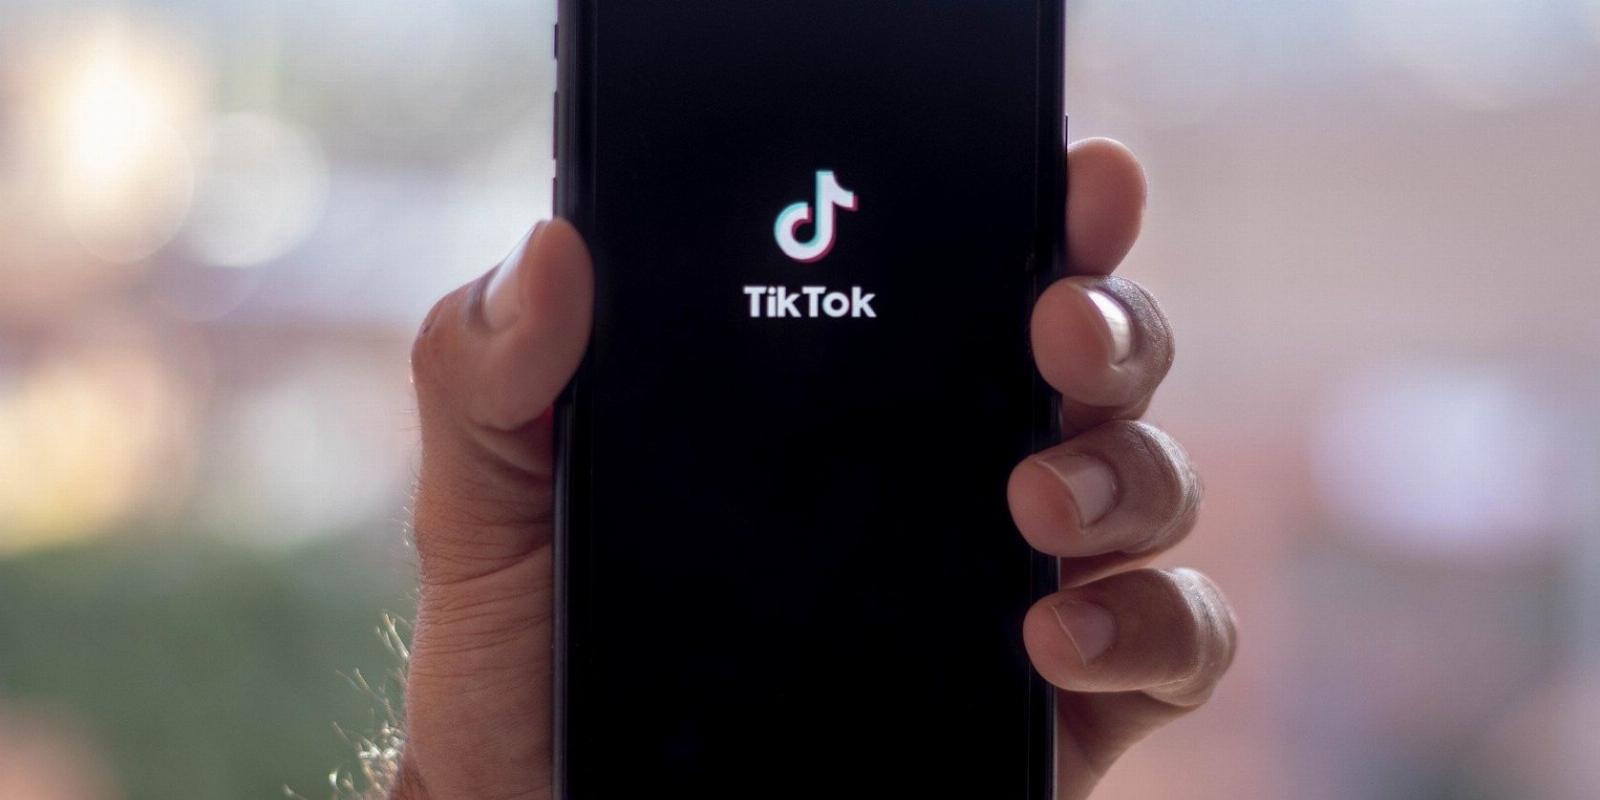 In What Countries Is TikTok Banned?